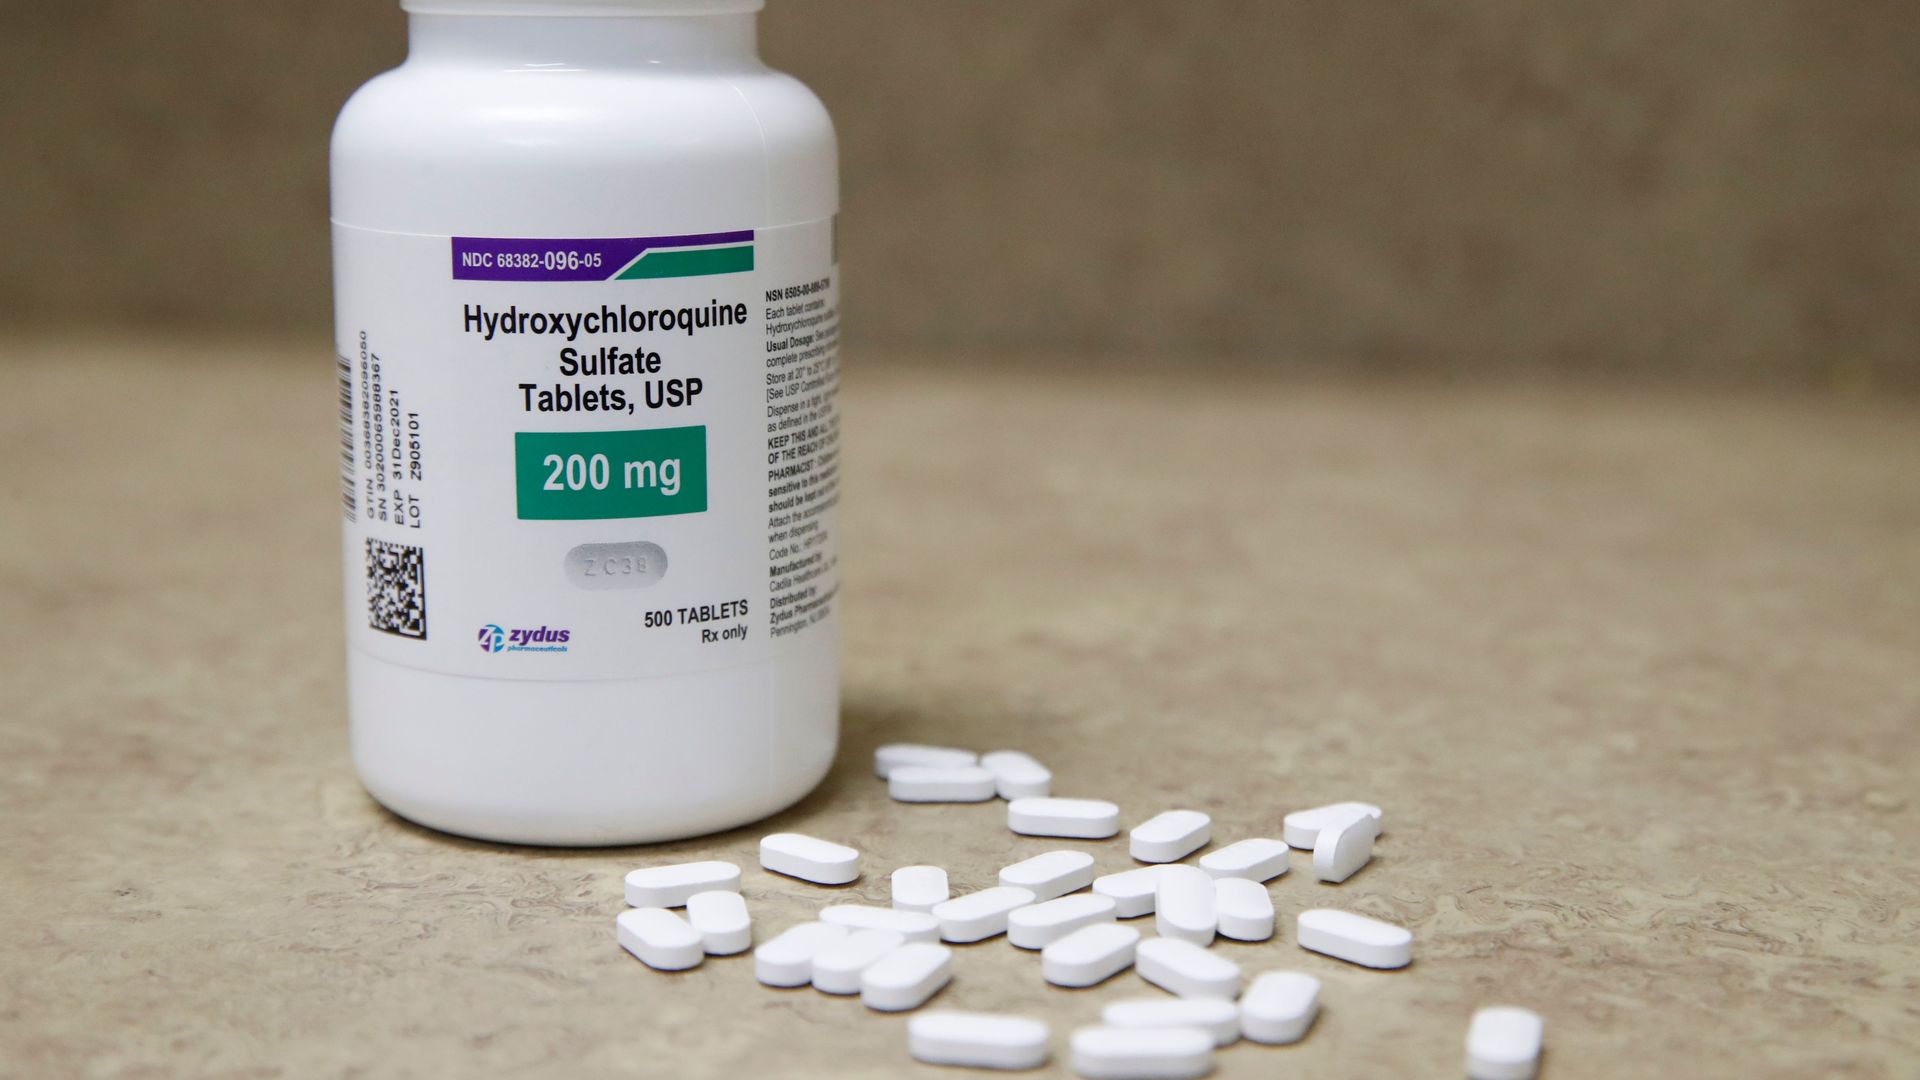 Photo of a bottle of hydroxychloroquine with pills on the sidd